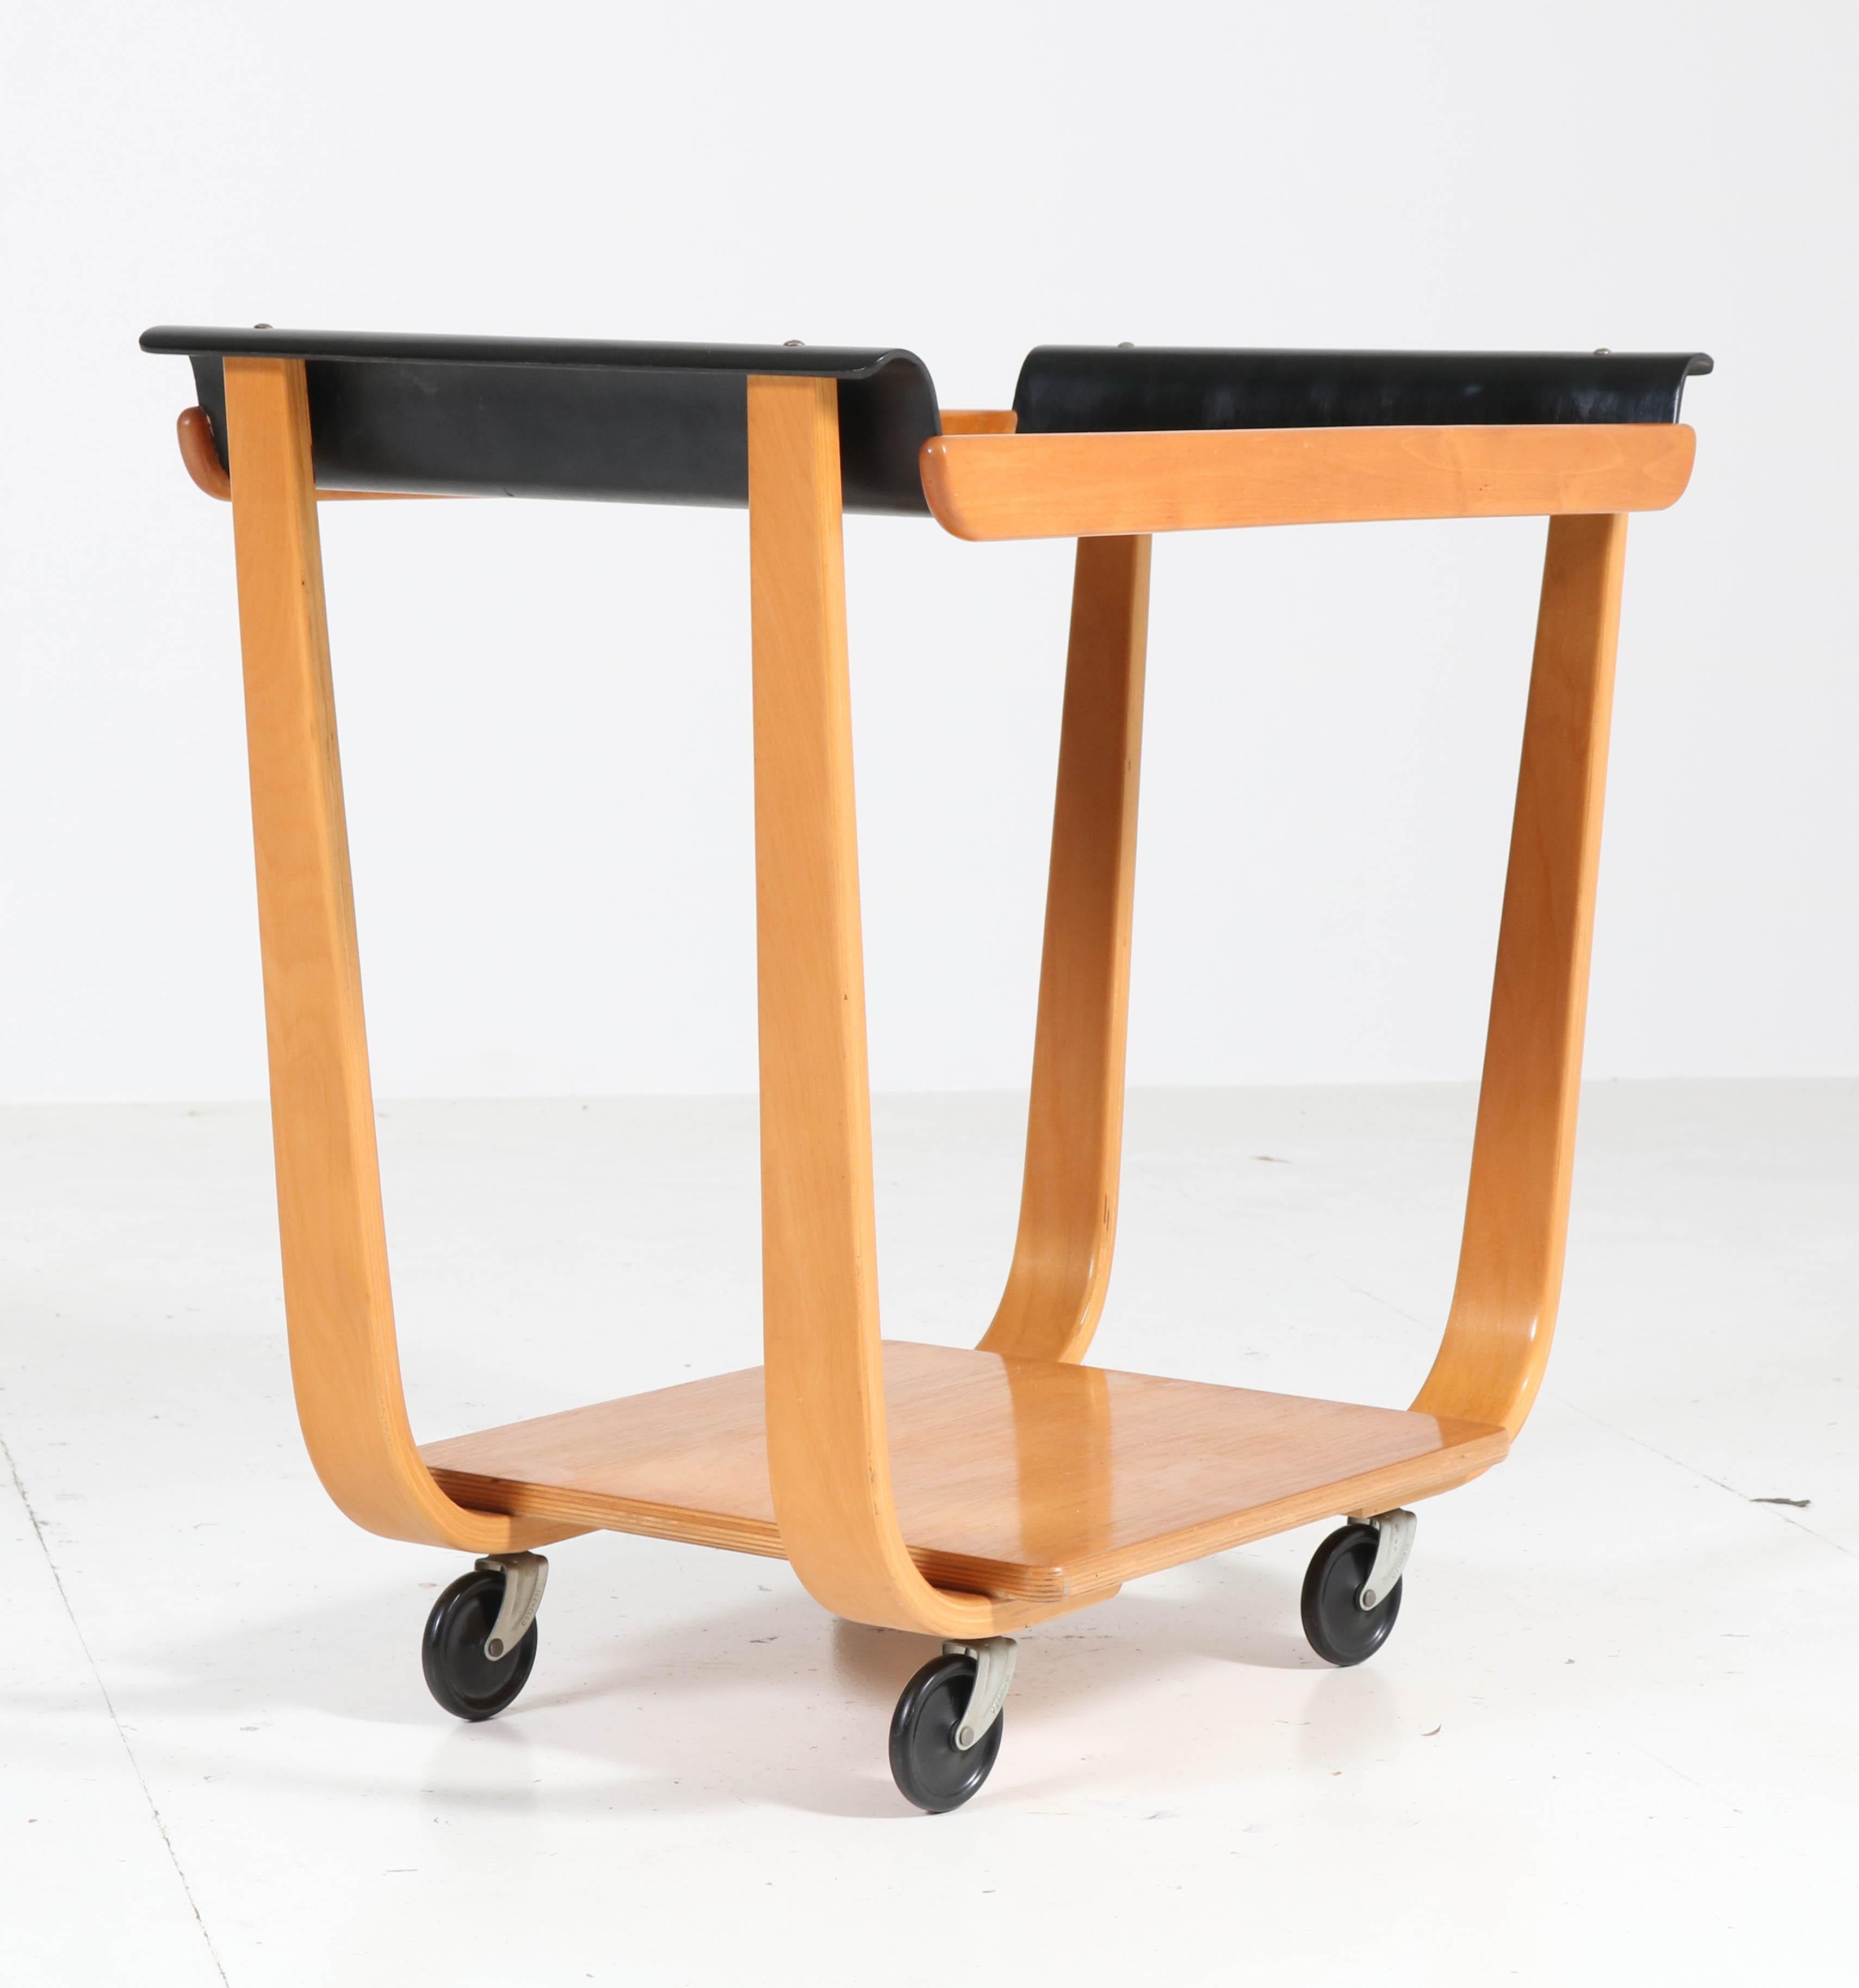 Wonderful Mid-Century Modern serving trolley.
Design by Cees Braakman for UMS Pastoe.
Iconic Dutch design from the 1950s.
Birch laminated plywood with black lacquered top.
In very good original condition with minor wear consistent with age and